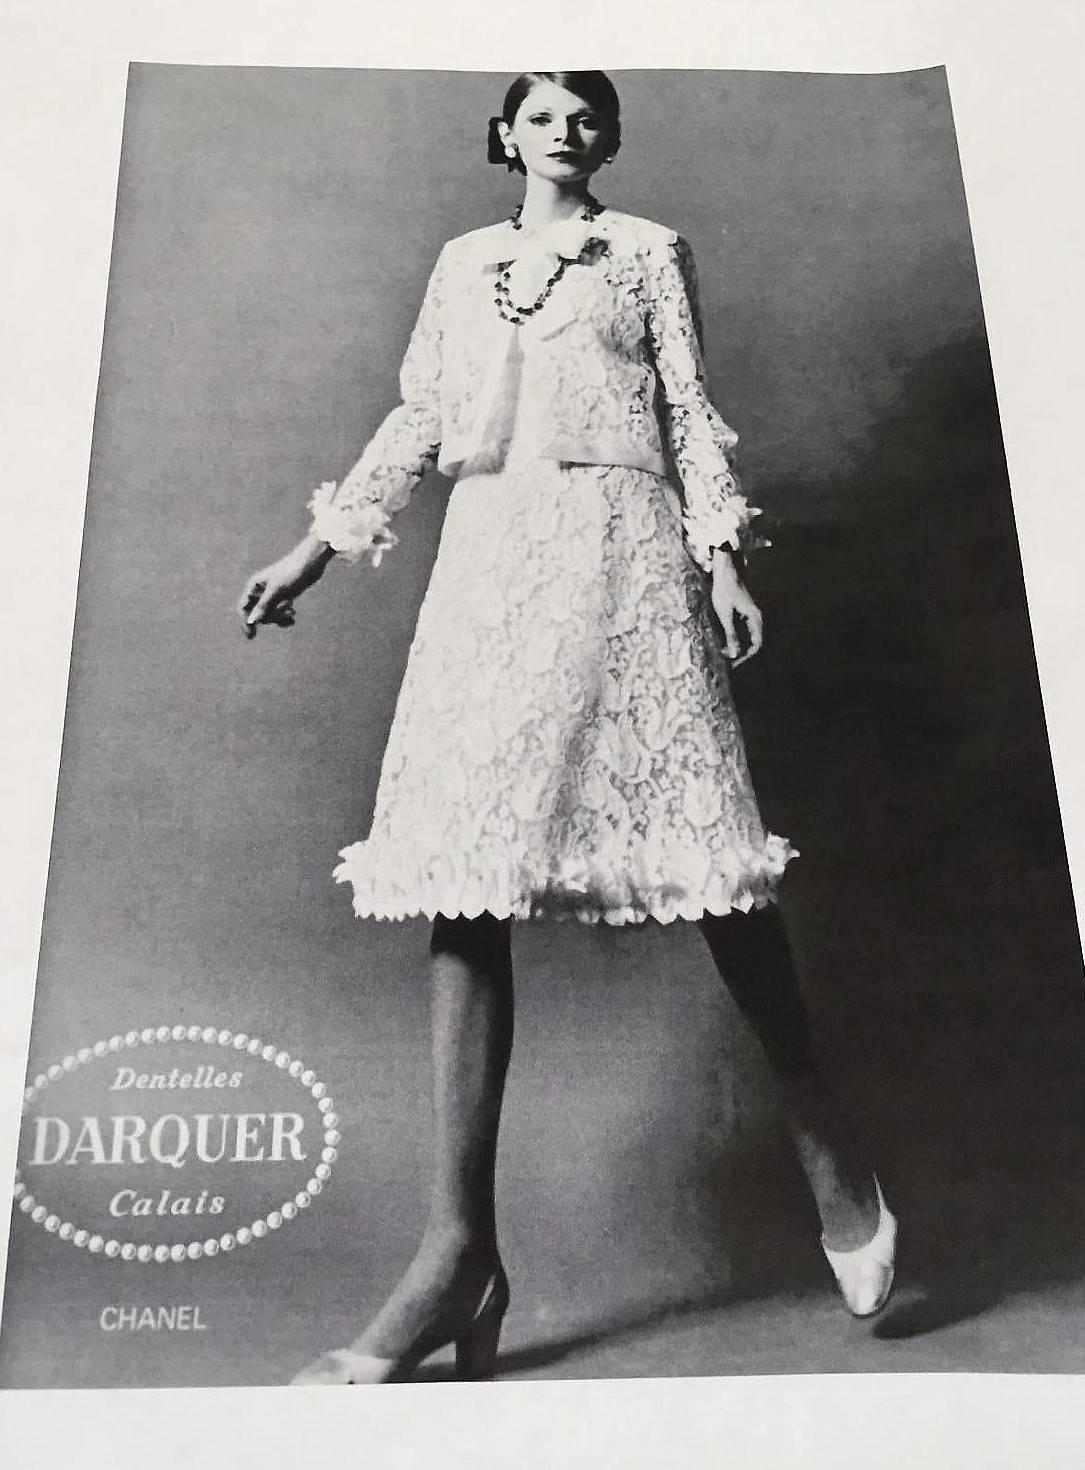 Chanel is known to be one of the most luxurious and decadent fashion houses in the world. This breathtaking white tulip-patterned Darquer Calais lace and satin cocktail dress ensemble from her 1971 Spring/Summer collection is a perfect example of